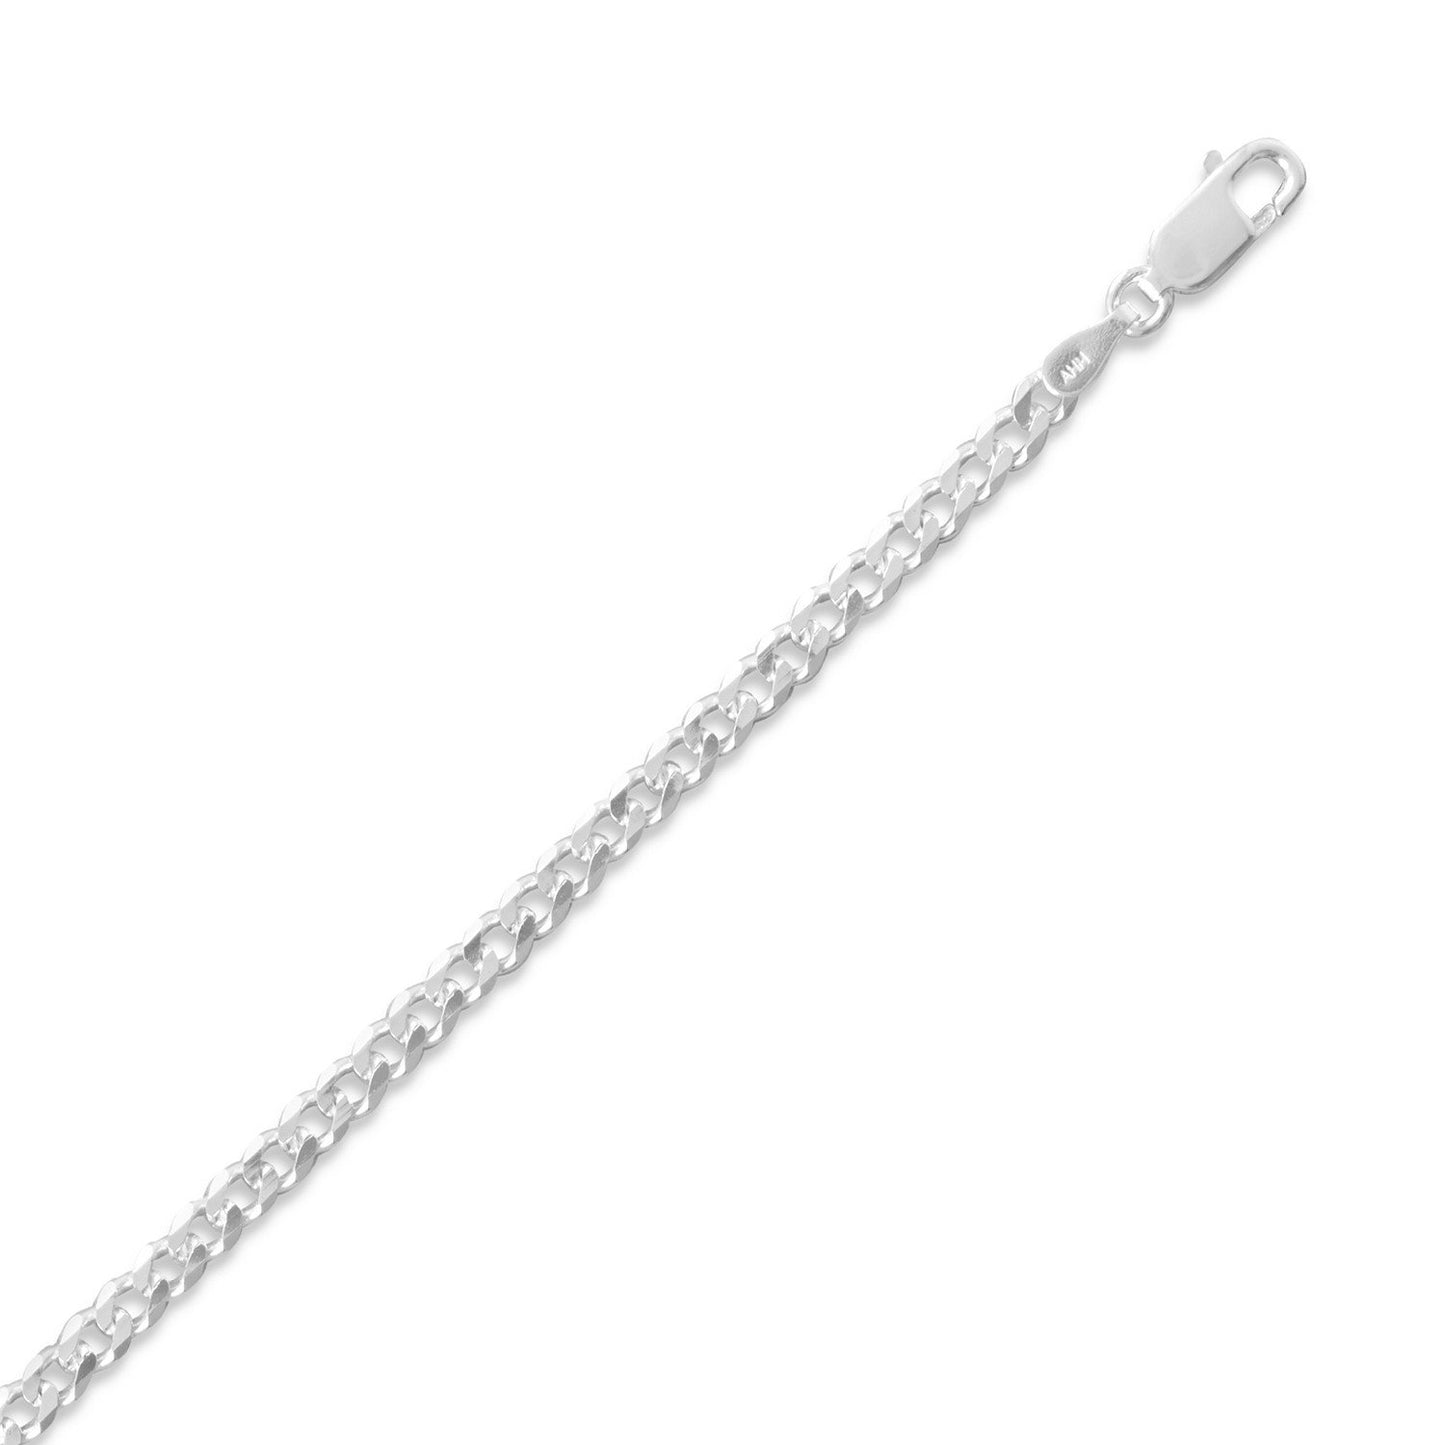 Precious Stars Sterling Silver 3 mm Curb Chain Necklace